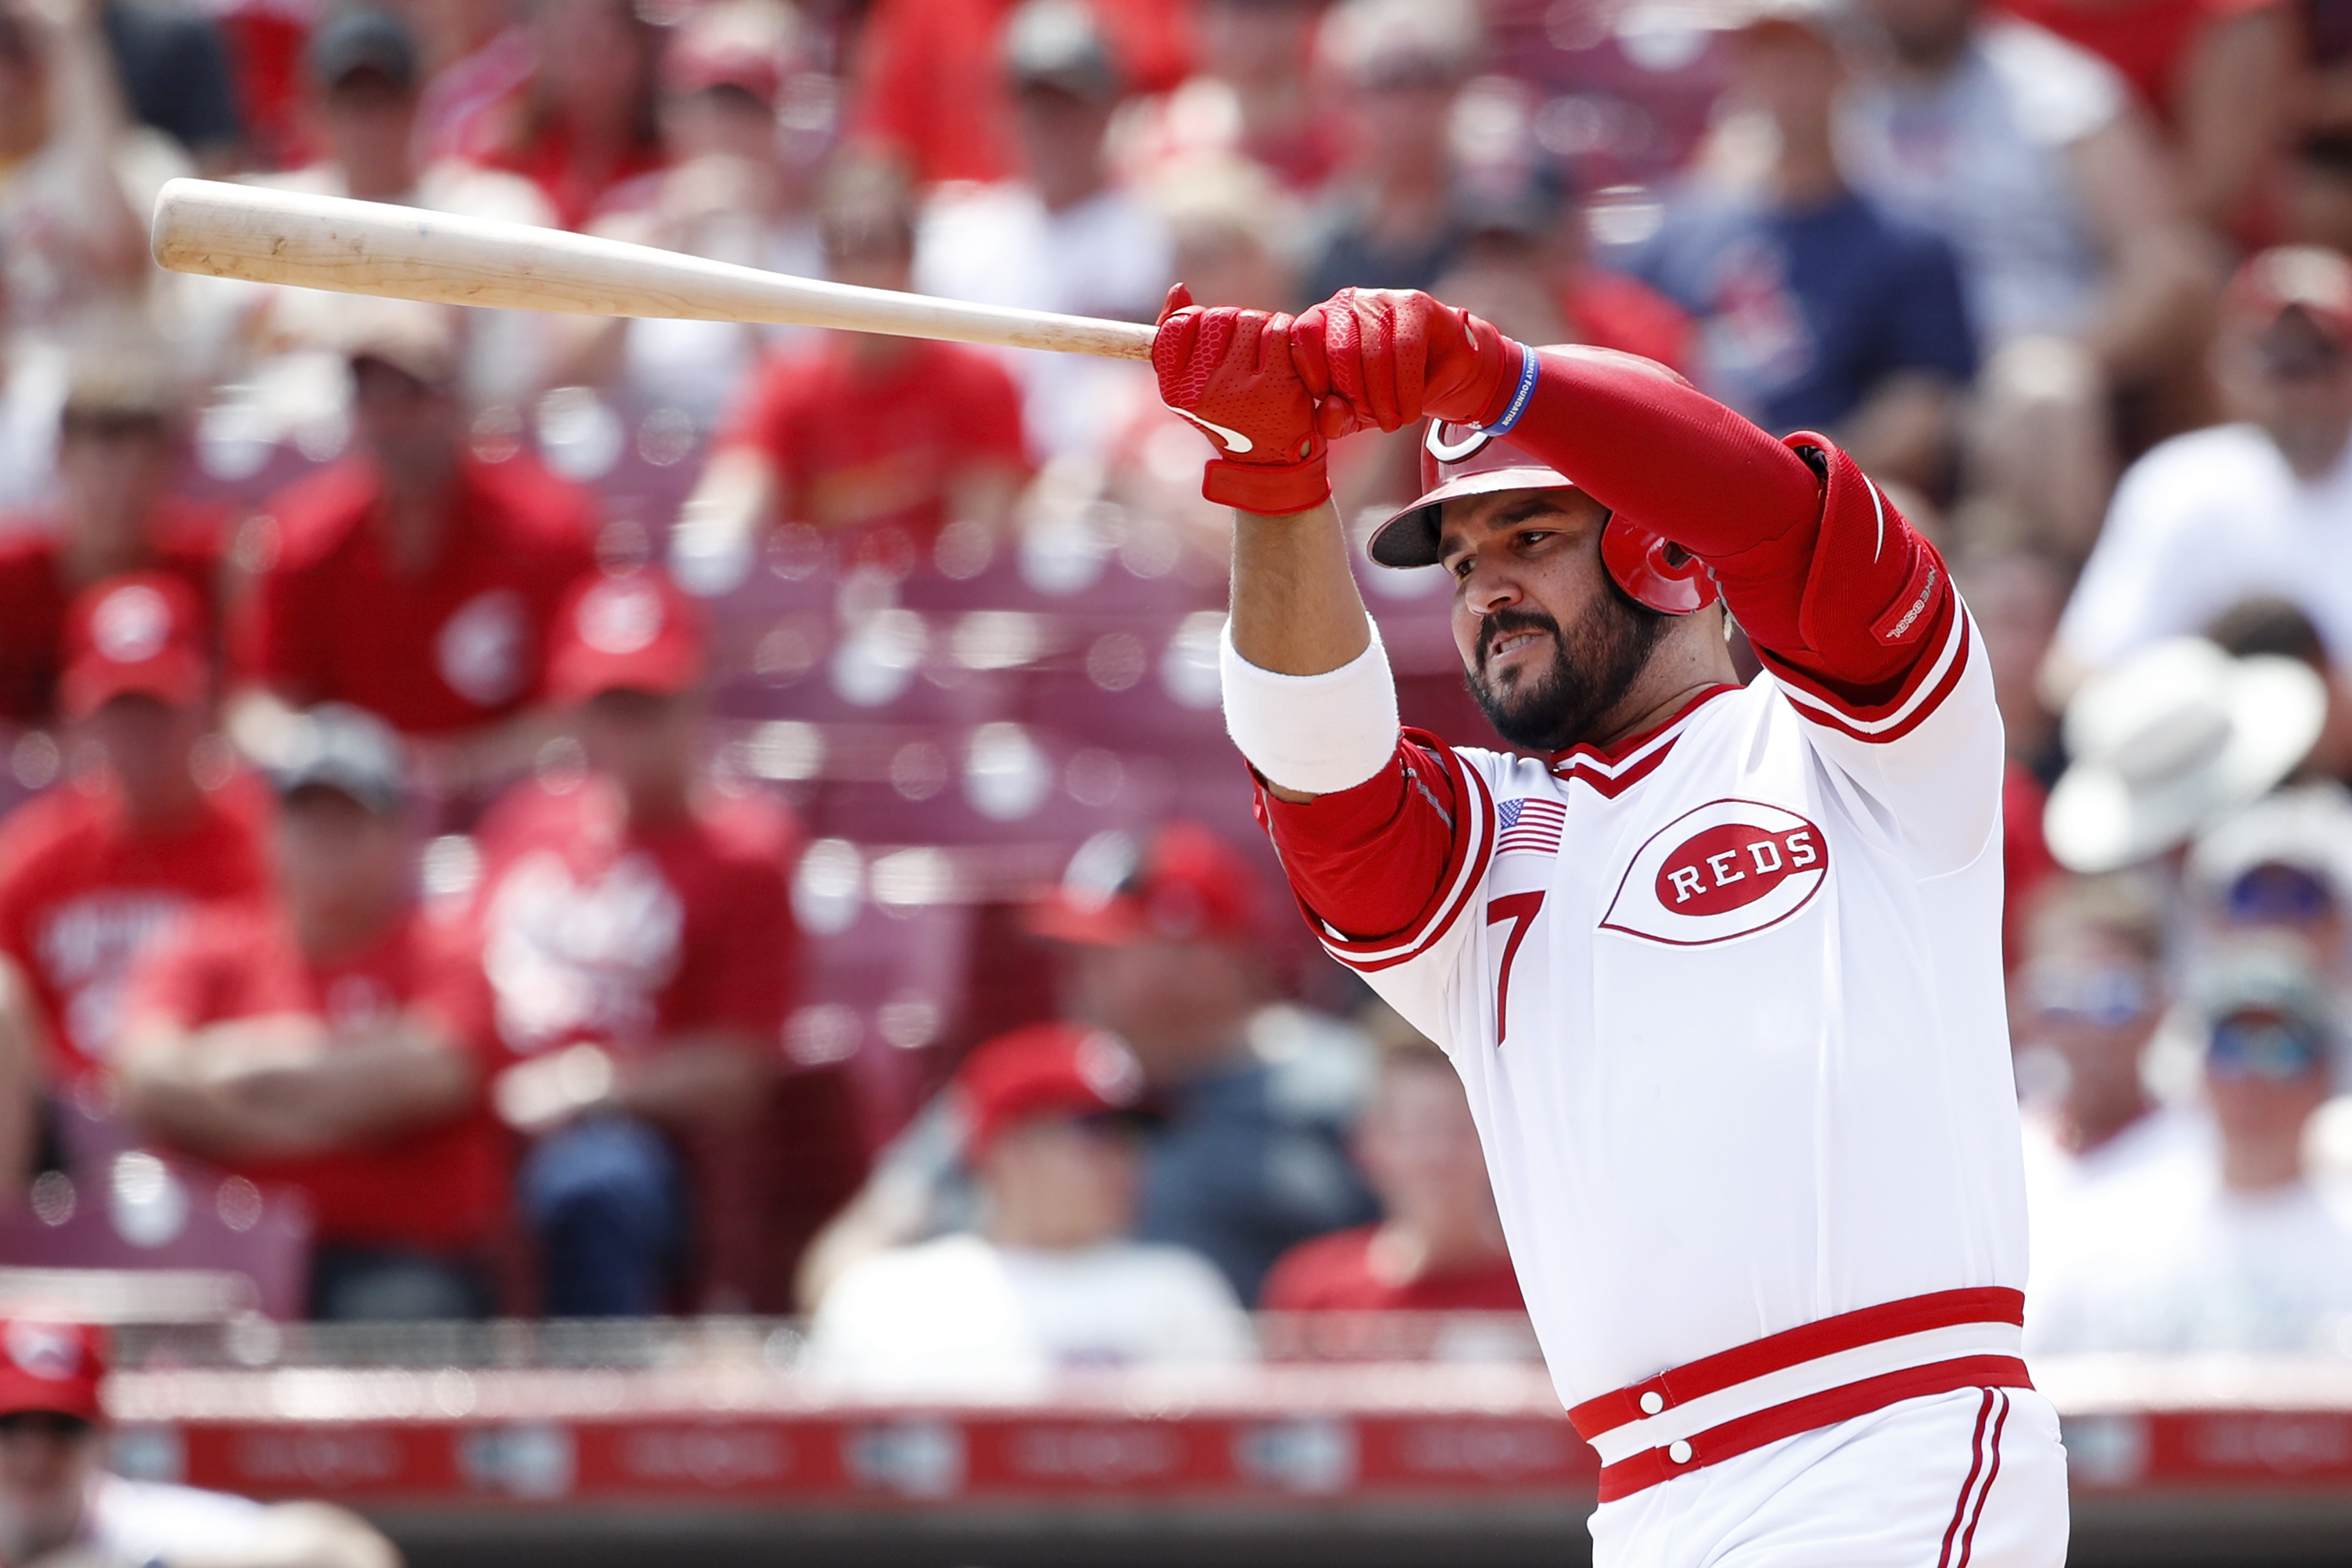 MLB Opening Day cancellation 2020 hits home in Cincinnati - Sports  Illustrated